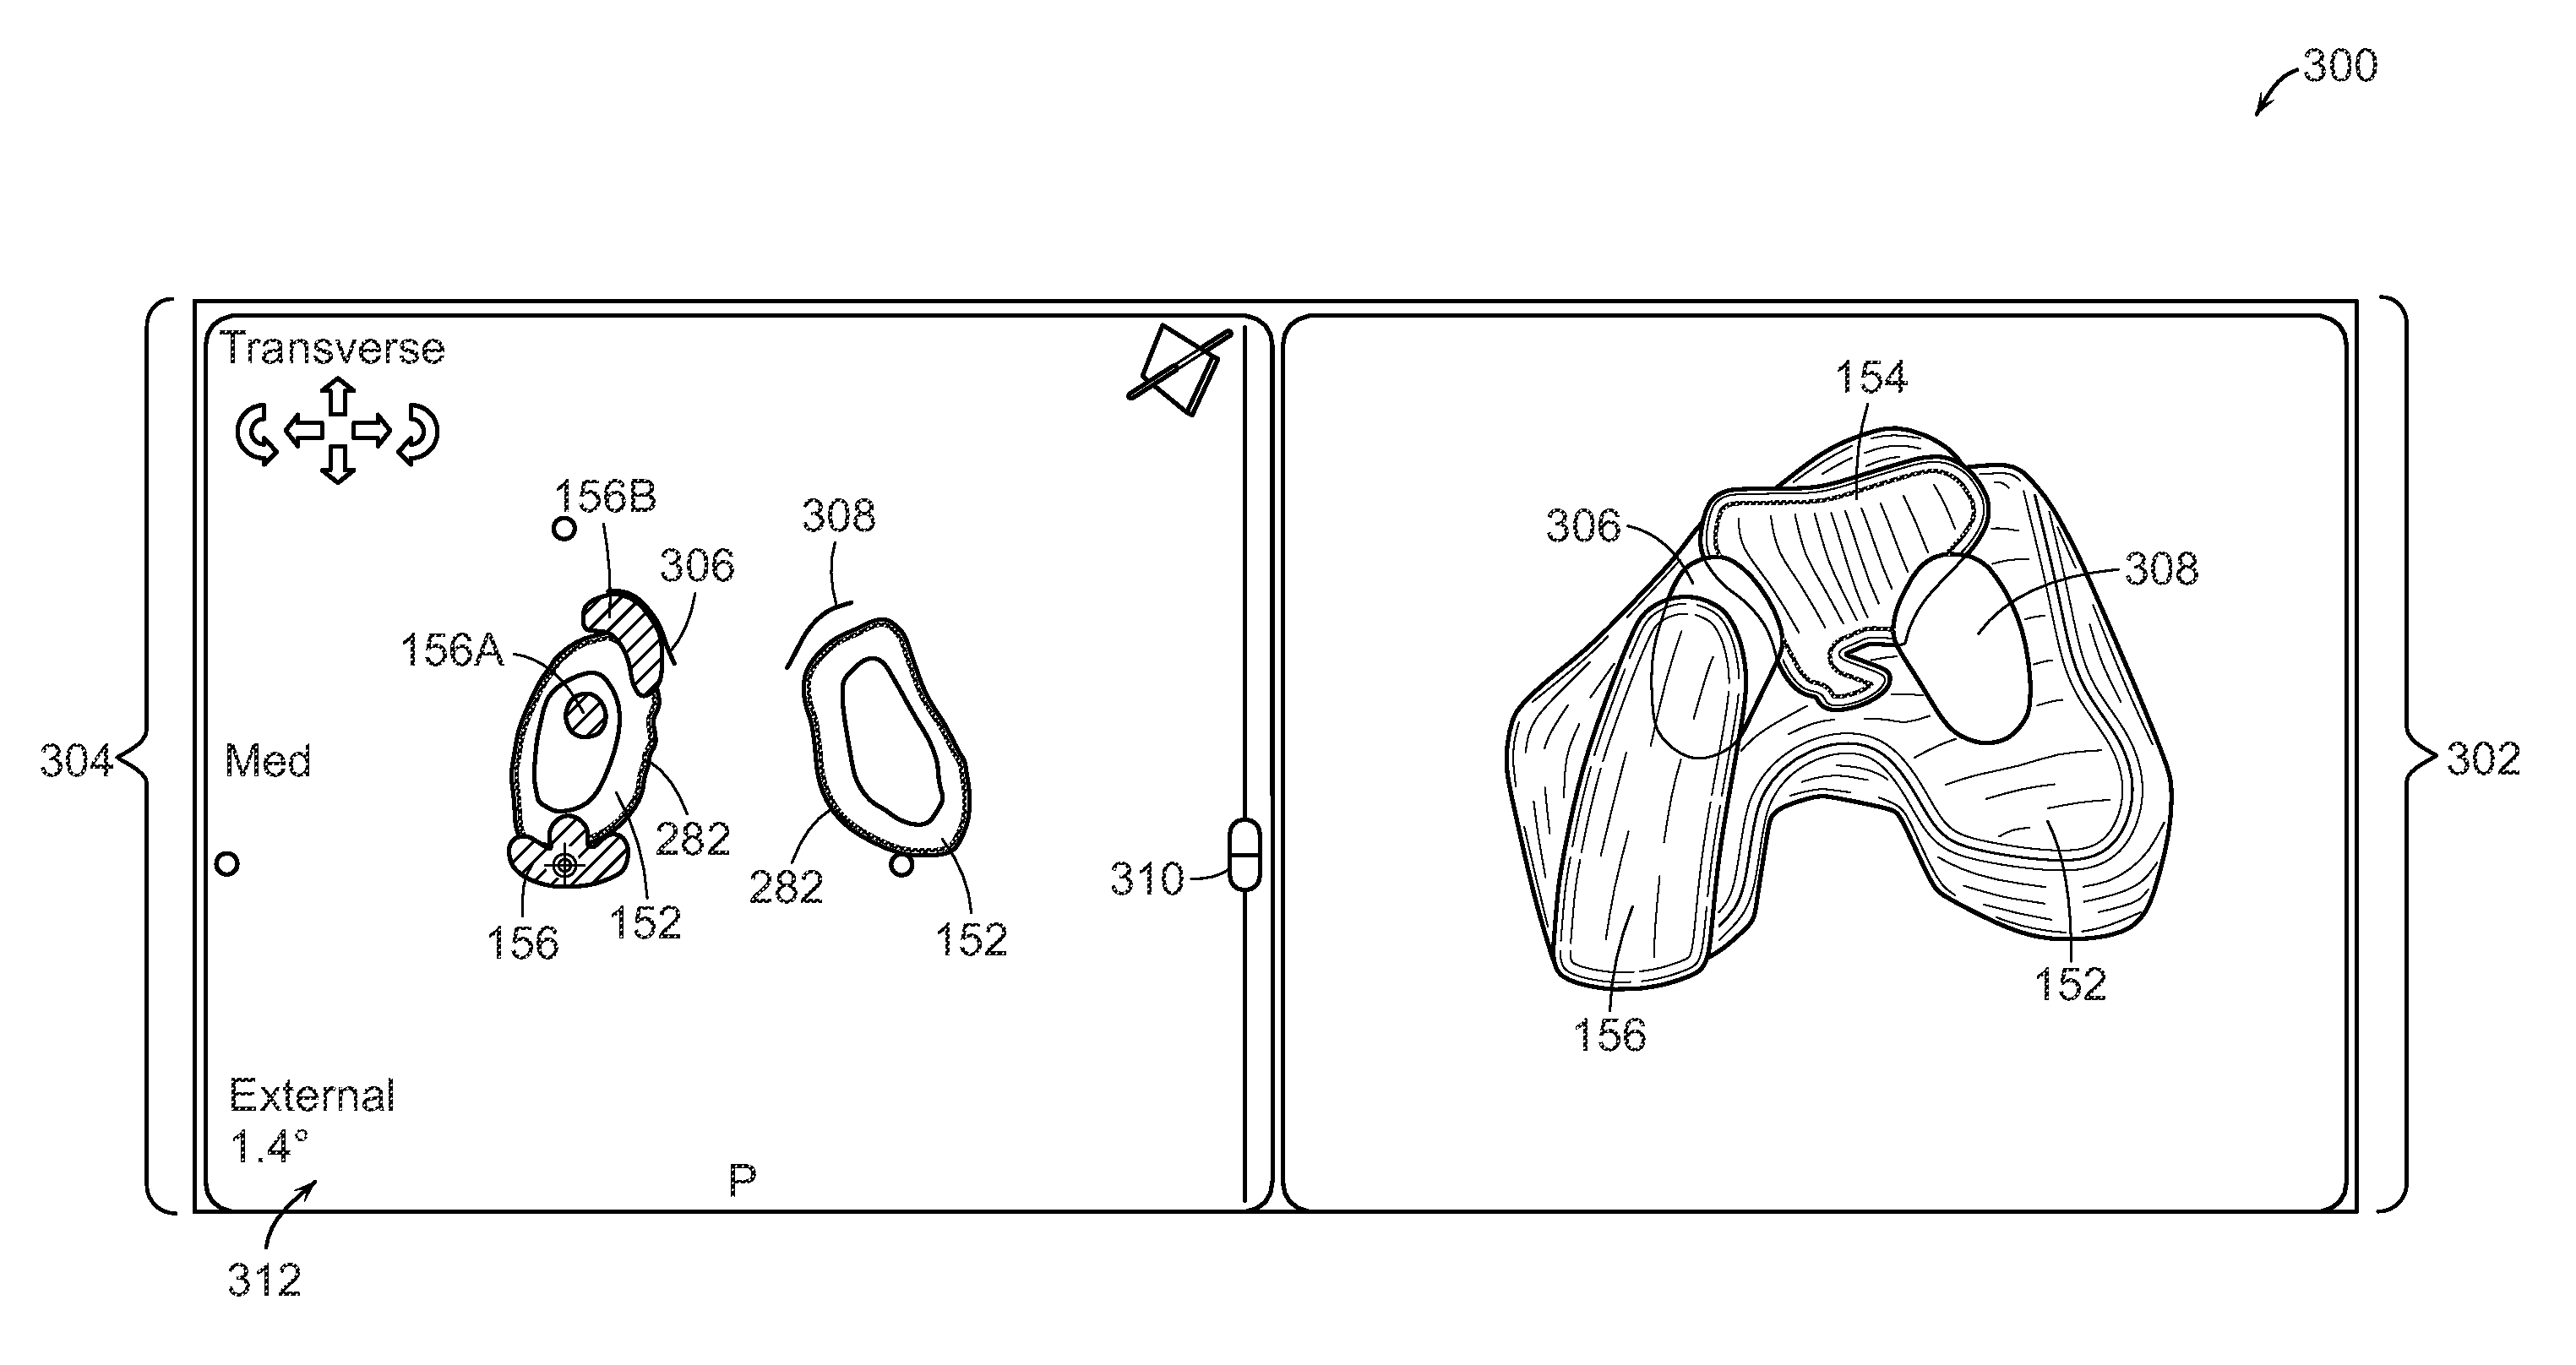 Implant planning for multiple implant components using constraints